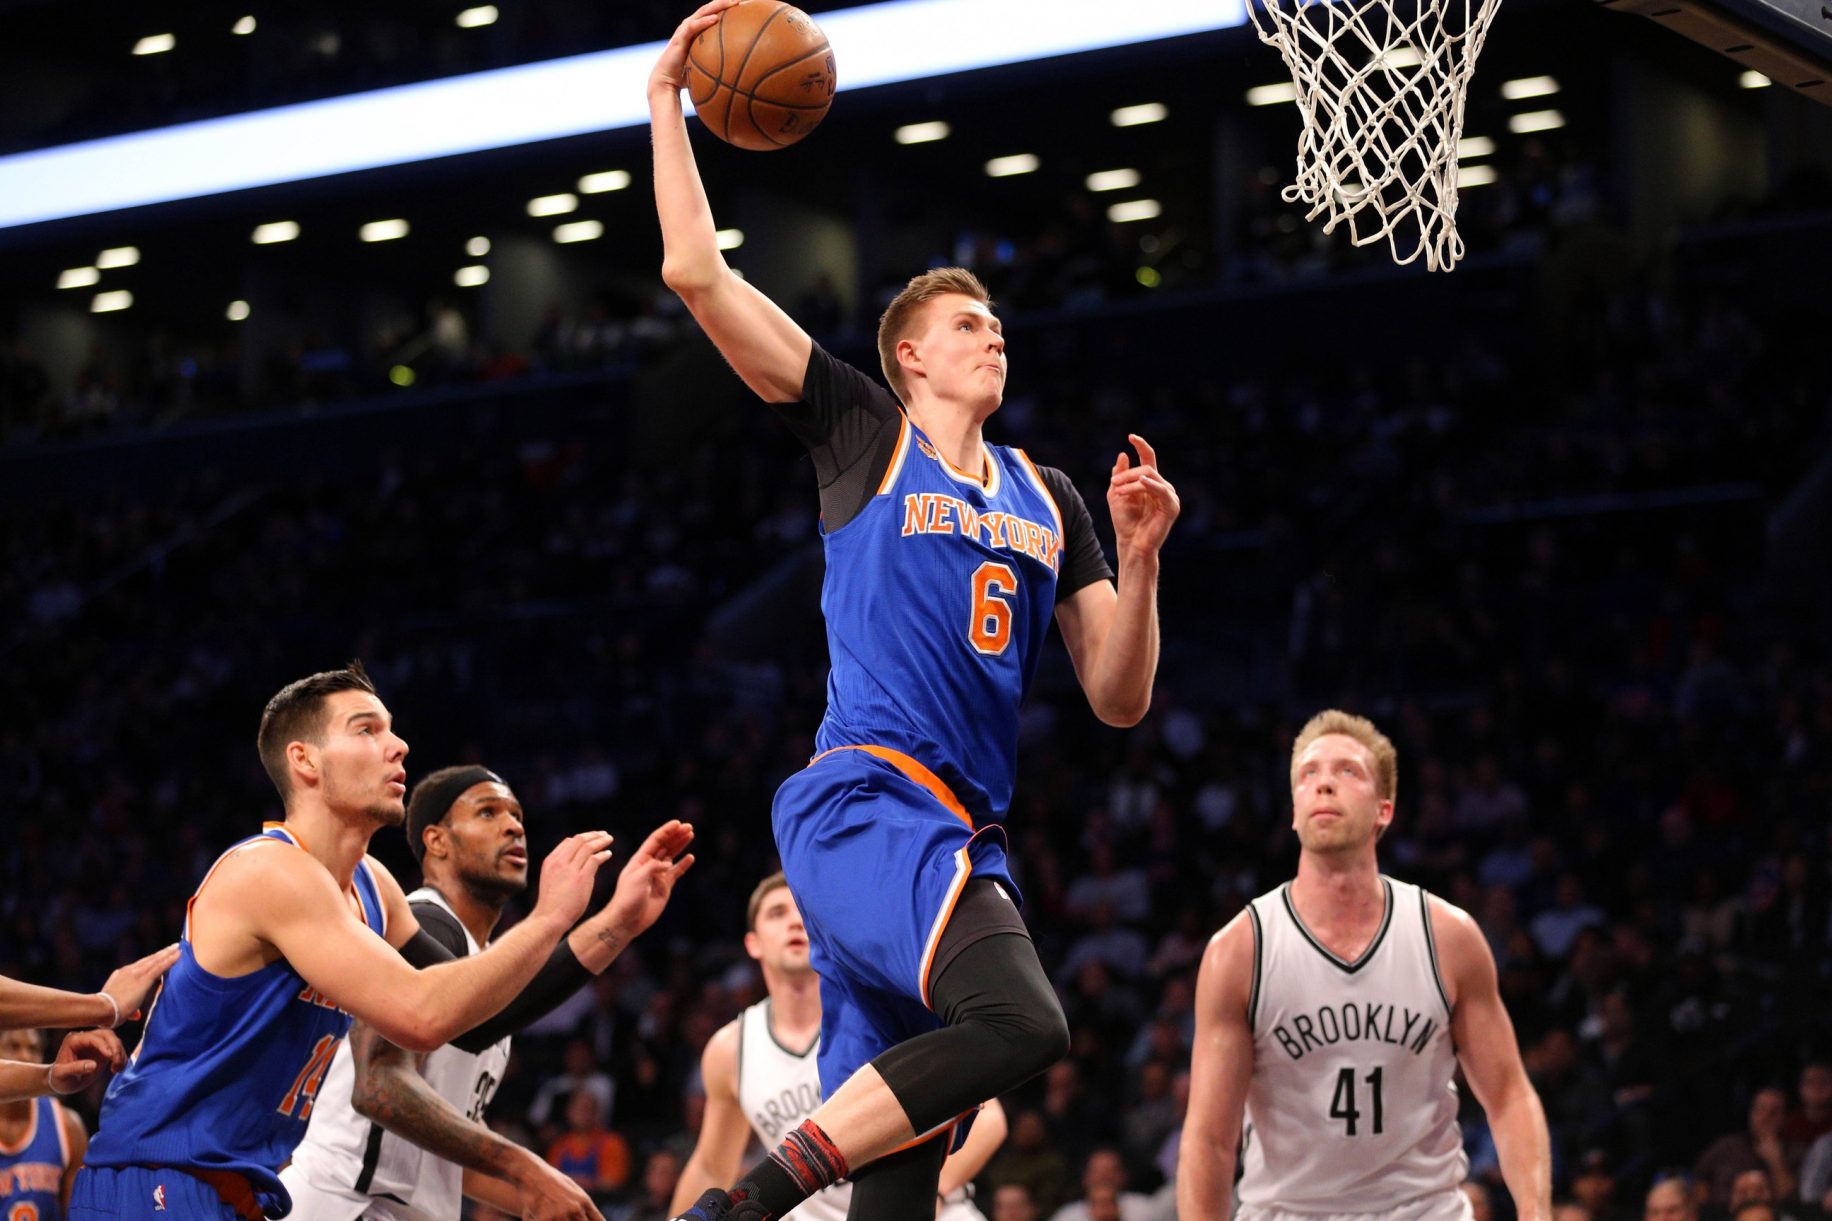 New York Knicks: Kristaps Porzingis to participate in the All-Star Weekend Skills Challenge 